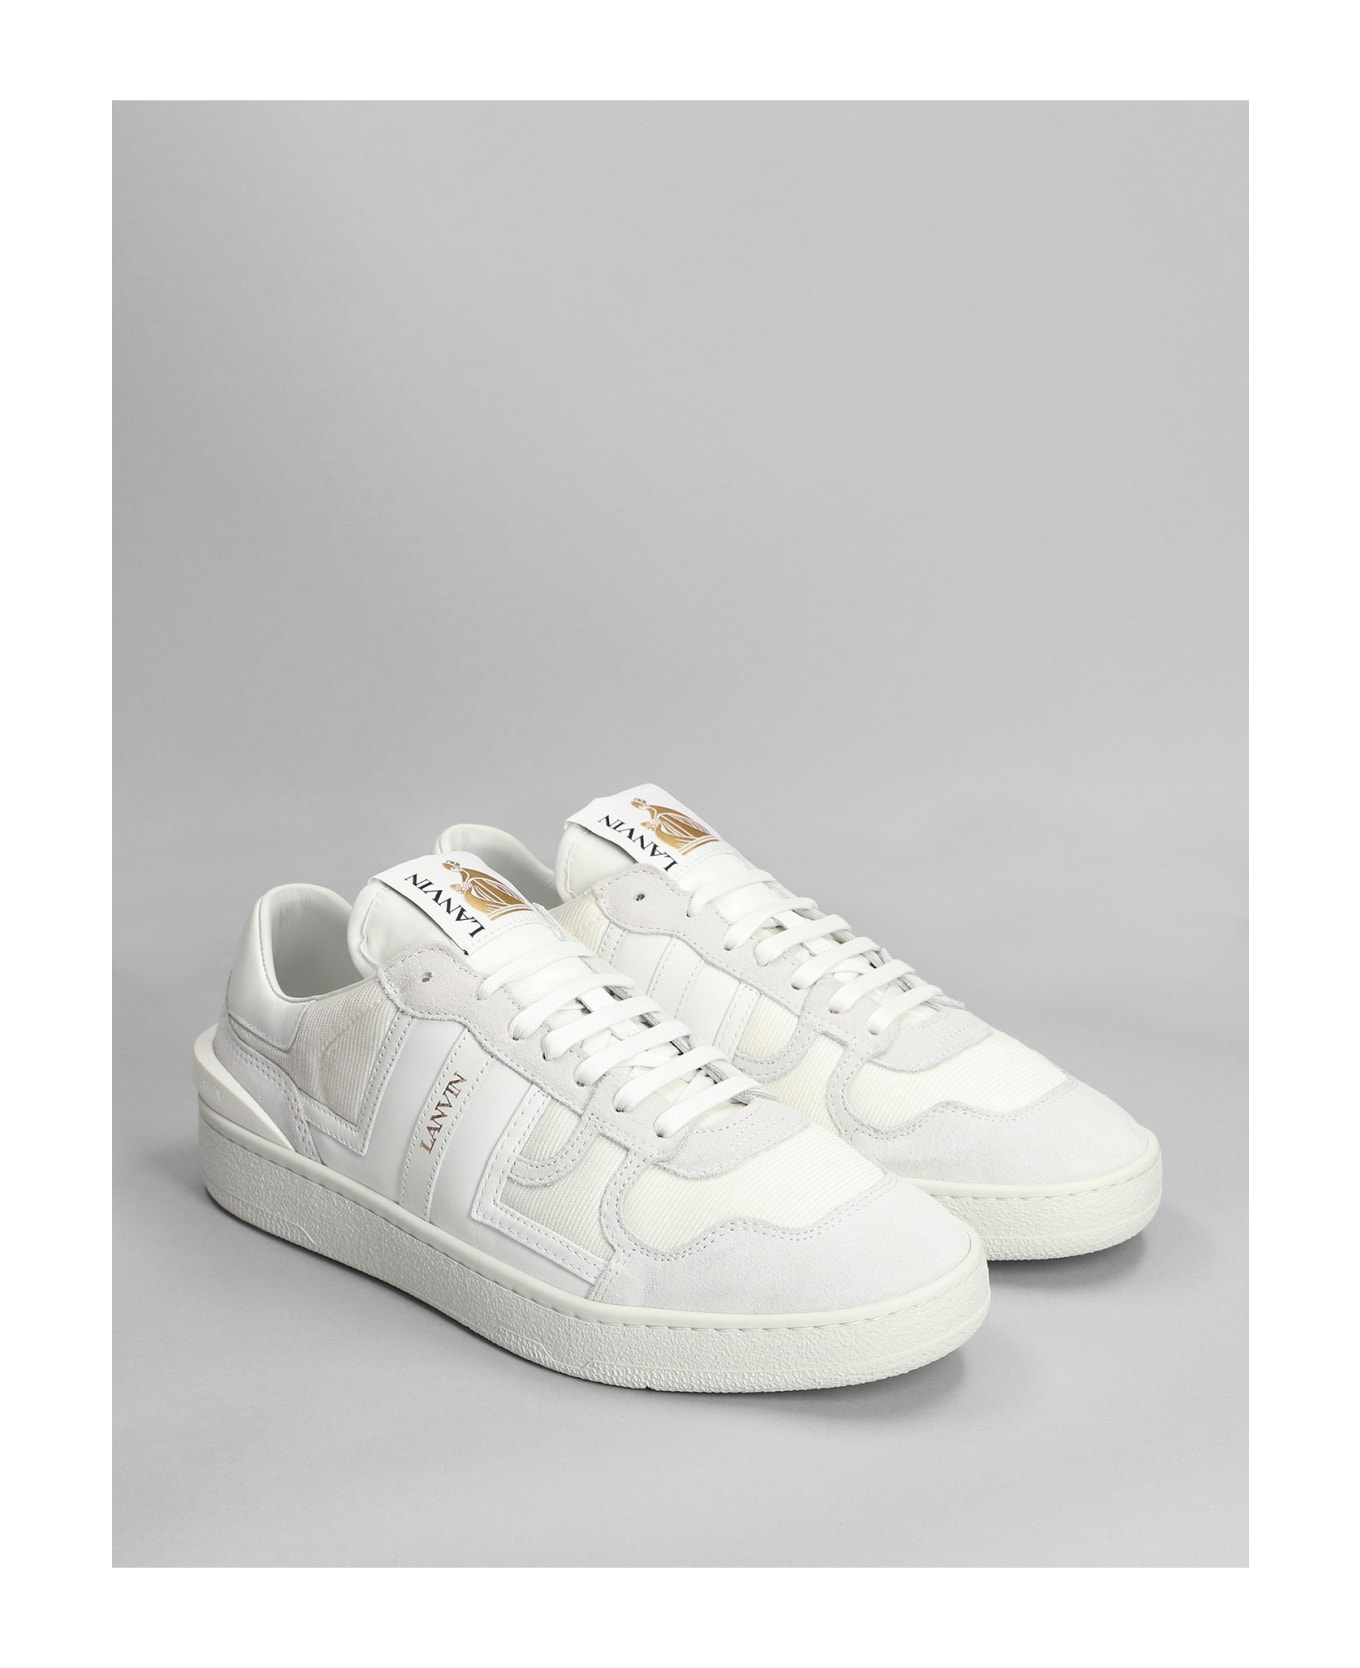 Lanvin Sneakers In White Leather - white